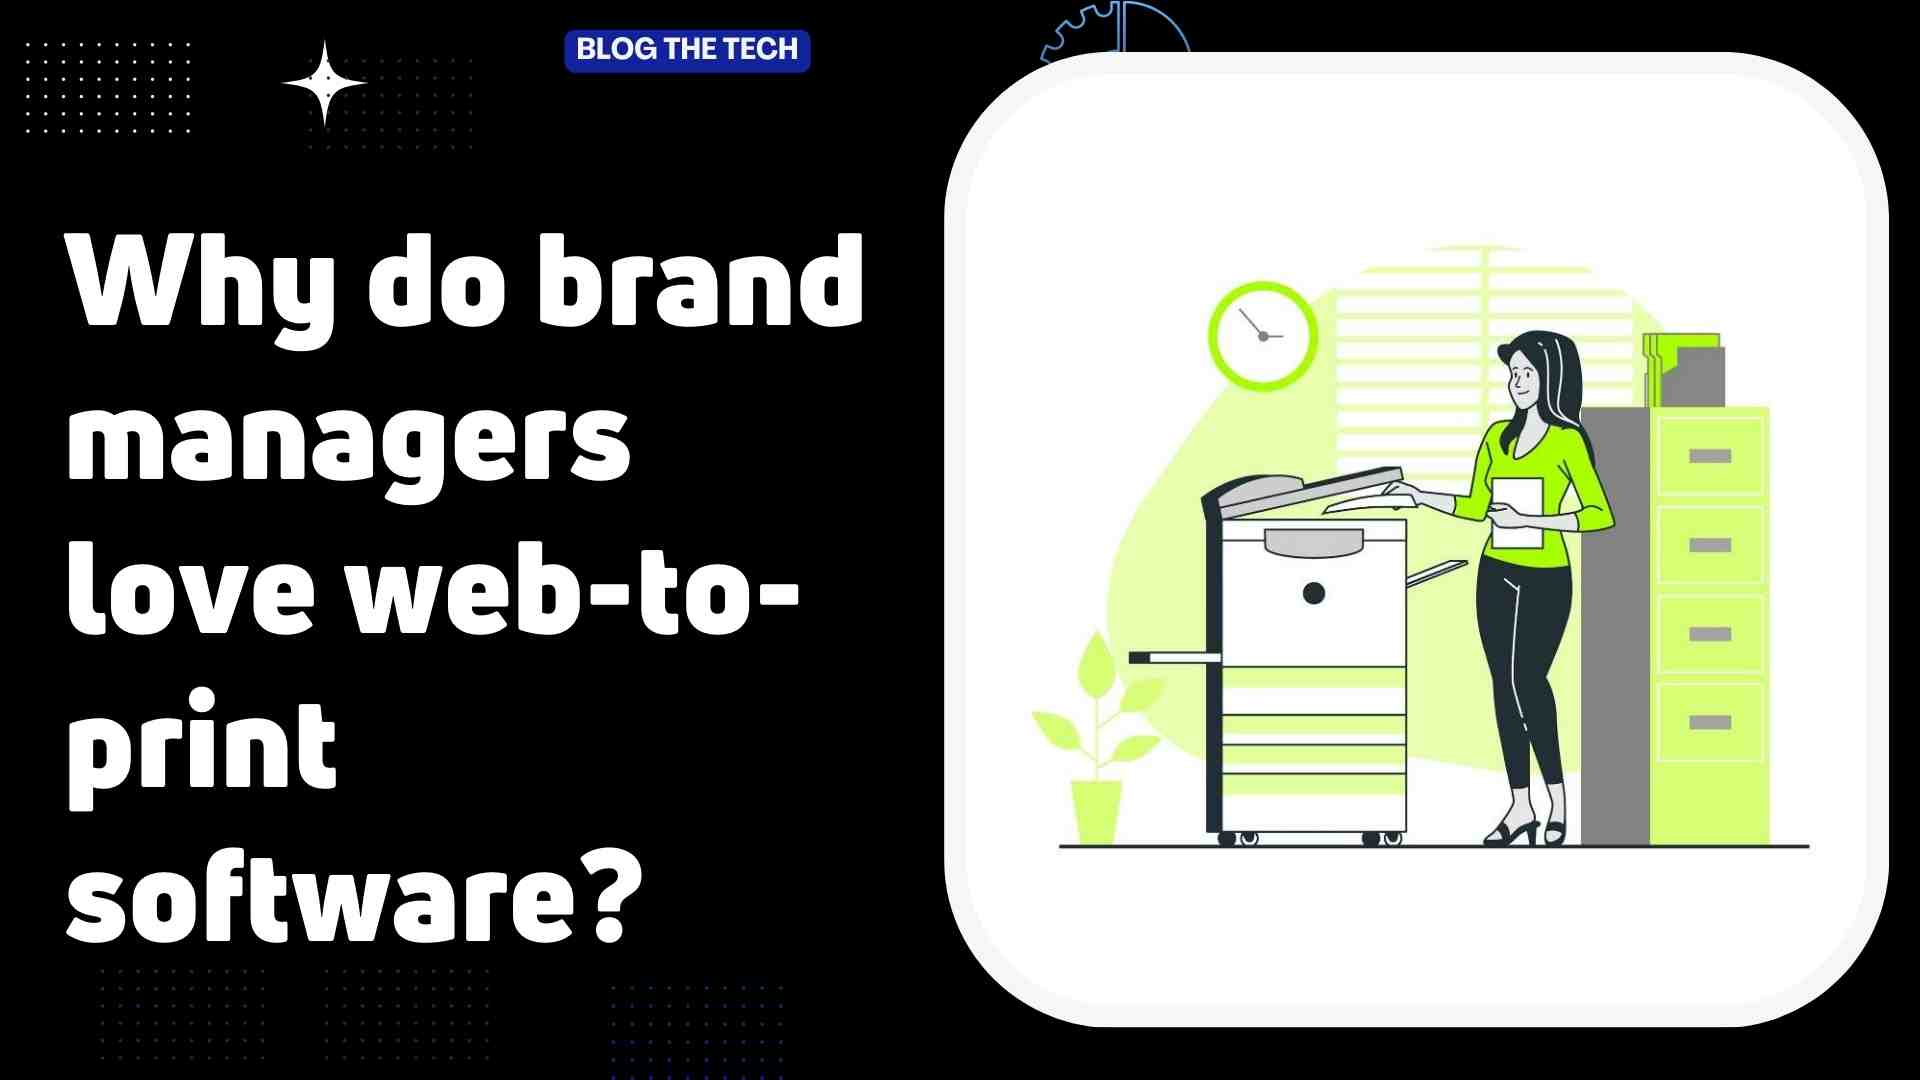 Why do brand managers love web-to-print software?